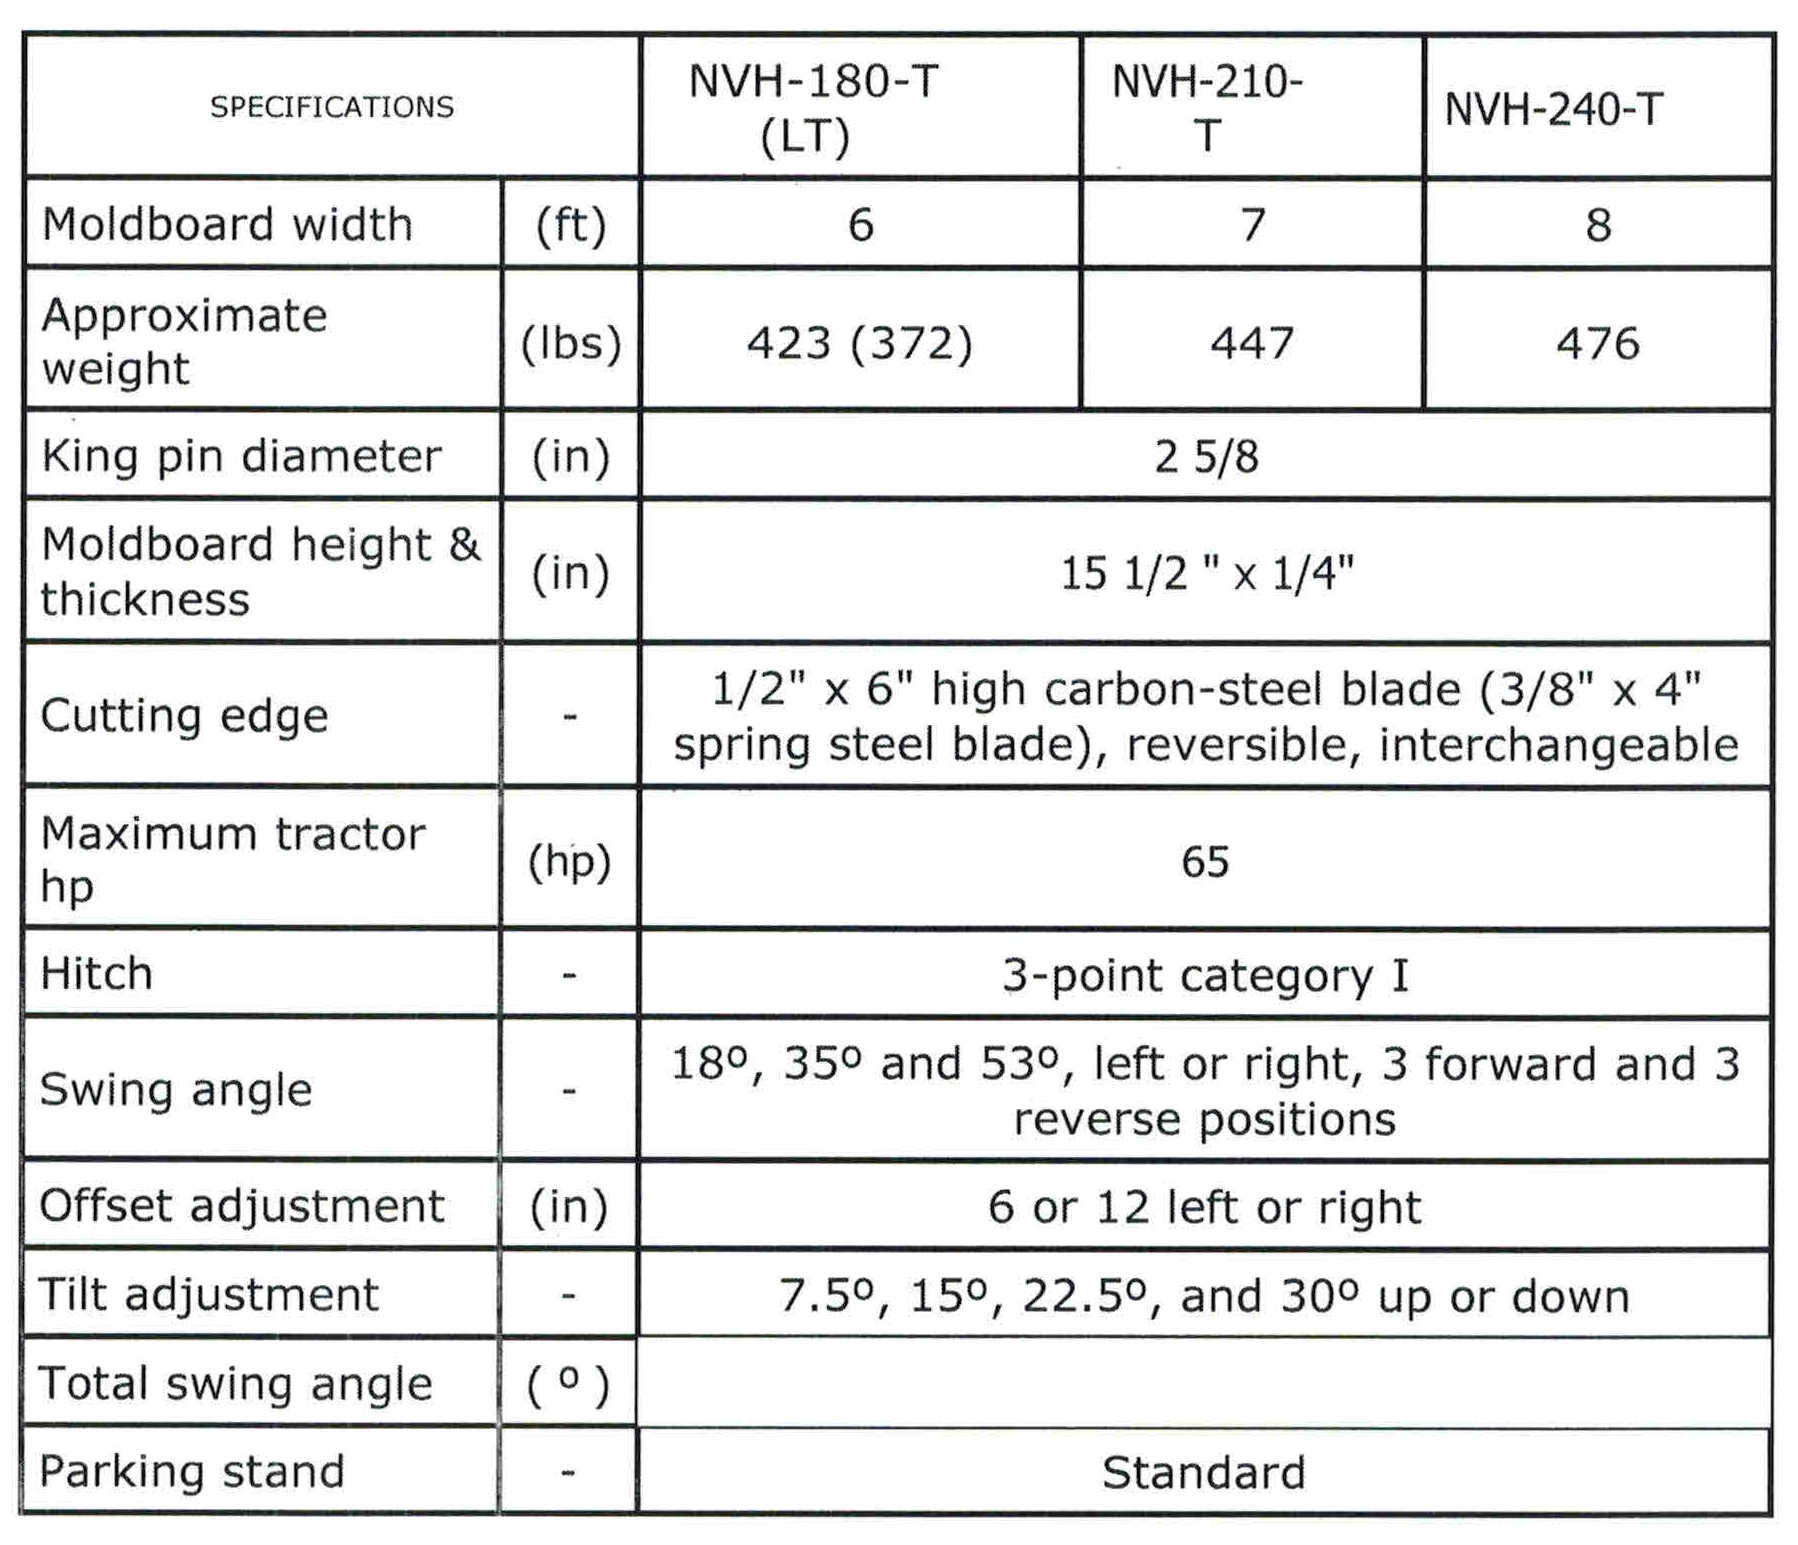 Specifications On The NVHT Series Tractor Blades